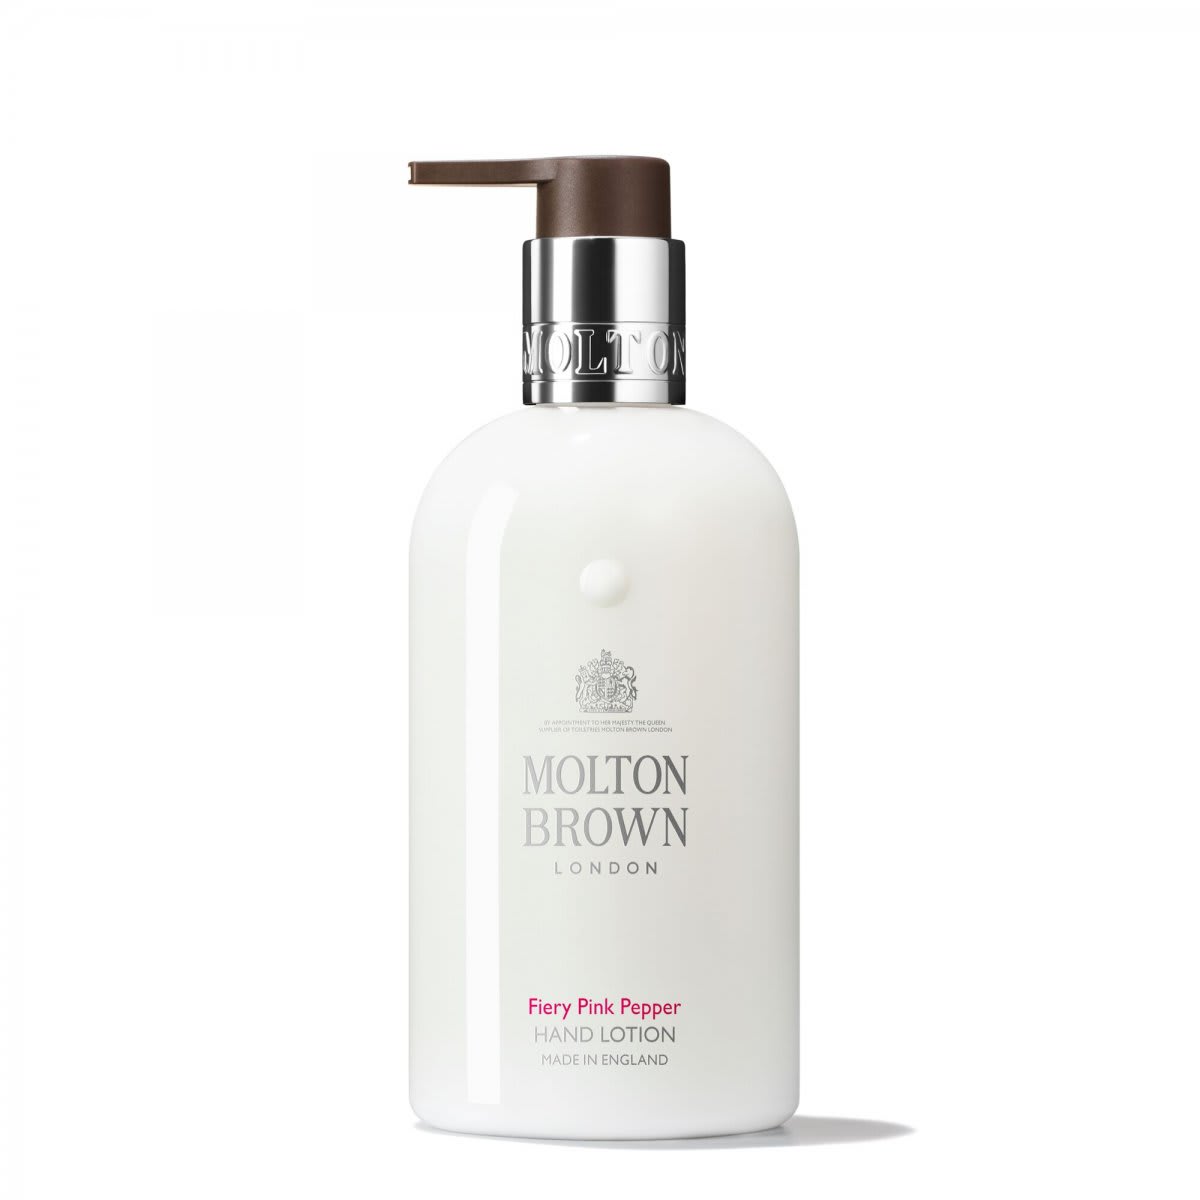 Molton Brown Fiery Pink Pepper Hand Lotion